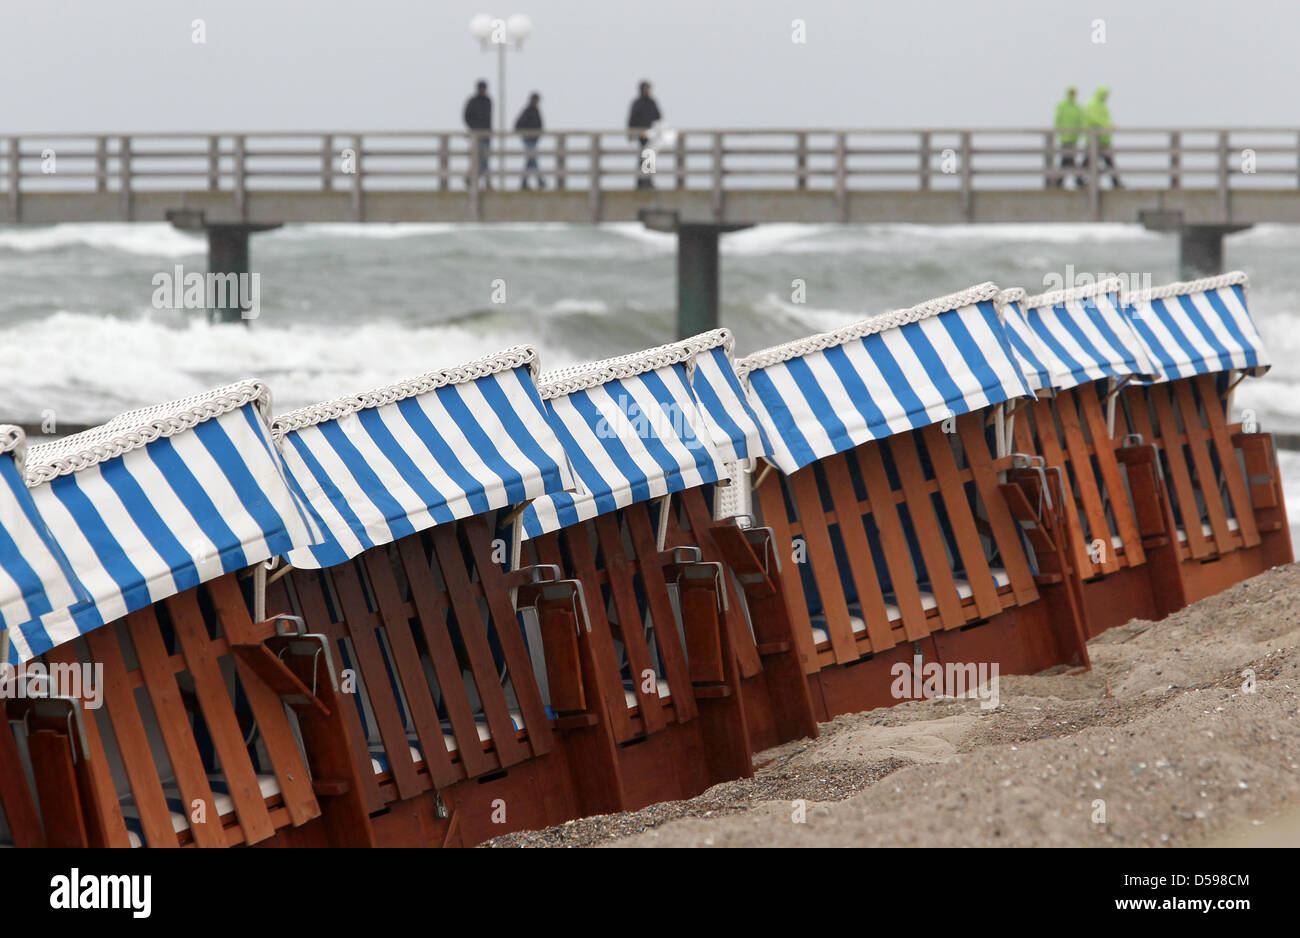 Wind and rain keep guests from visiting the Baltic resort Kuehlungsborn, Germany, 31 May 2010. Despite the conditions, beach chairs are already prepared for expected visitors. Photo: Bernd Wuestneck Stock Photo